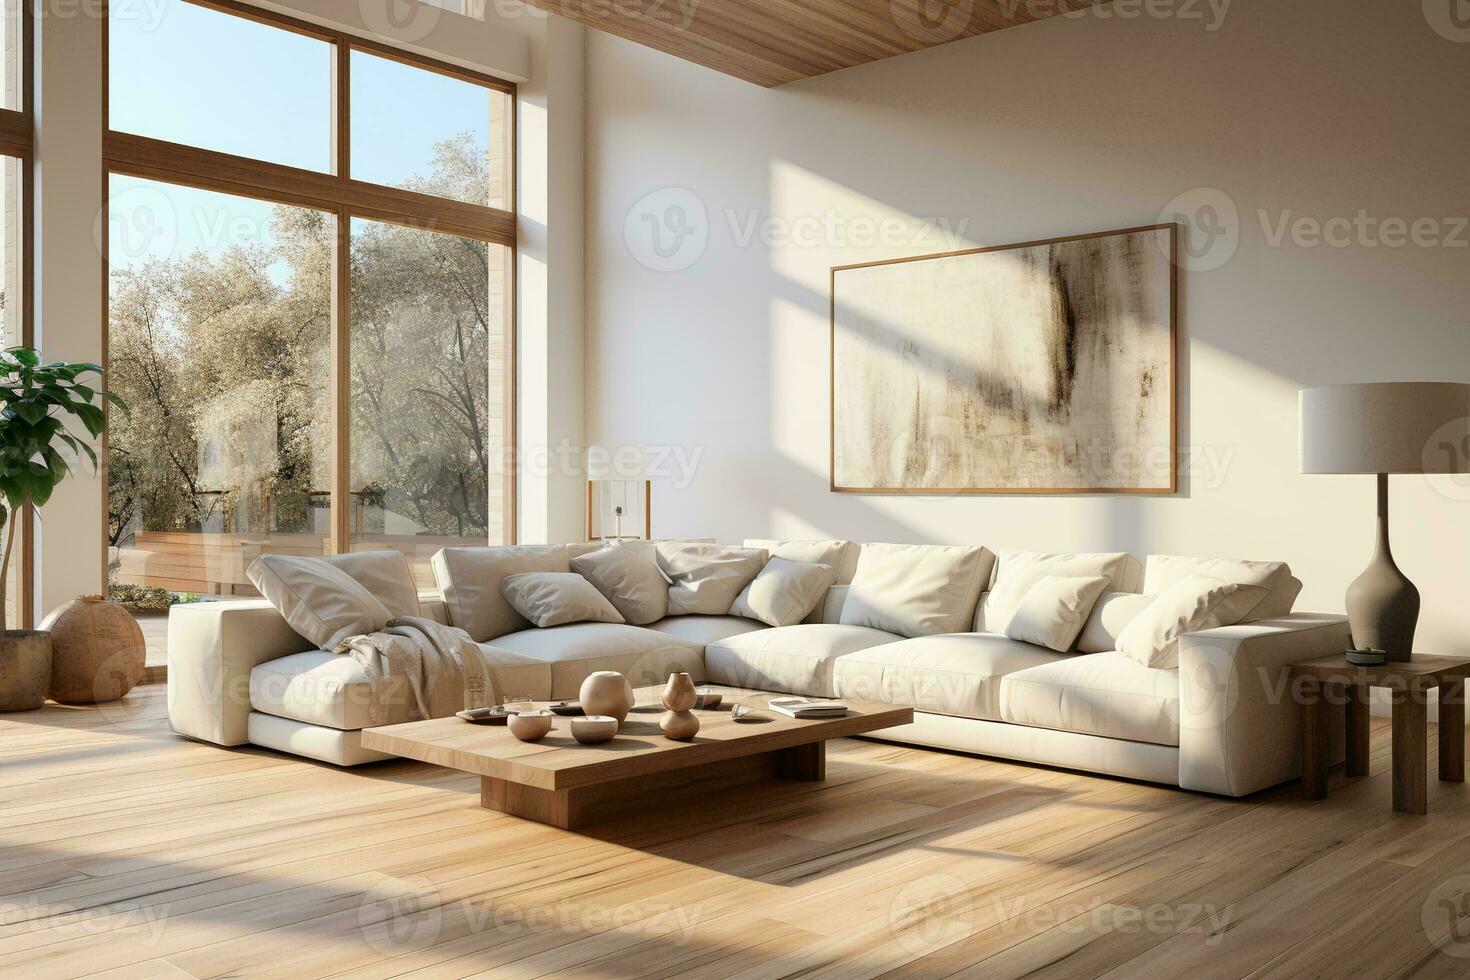 AI generated A photo-realistic image of a modern living room with a stunning view of nature. The room is furnished with a white sectional sofa, a wooden coffee table, and a wooden side table. photo